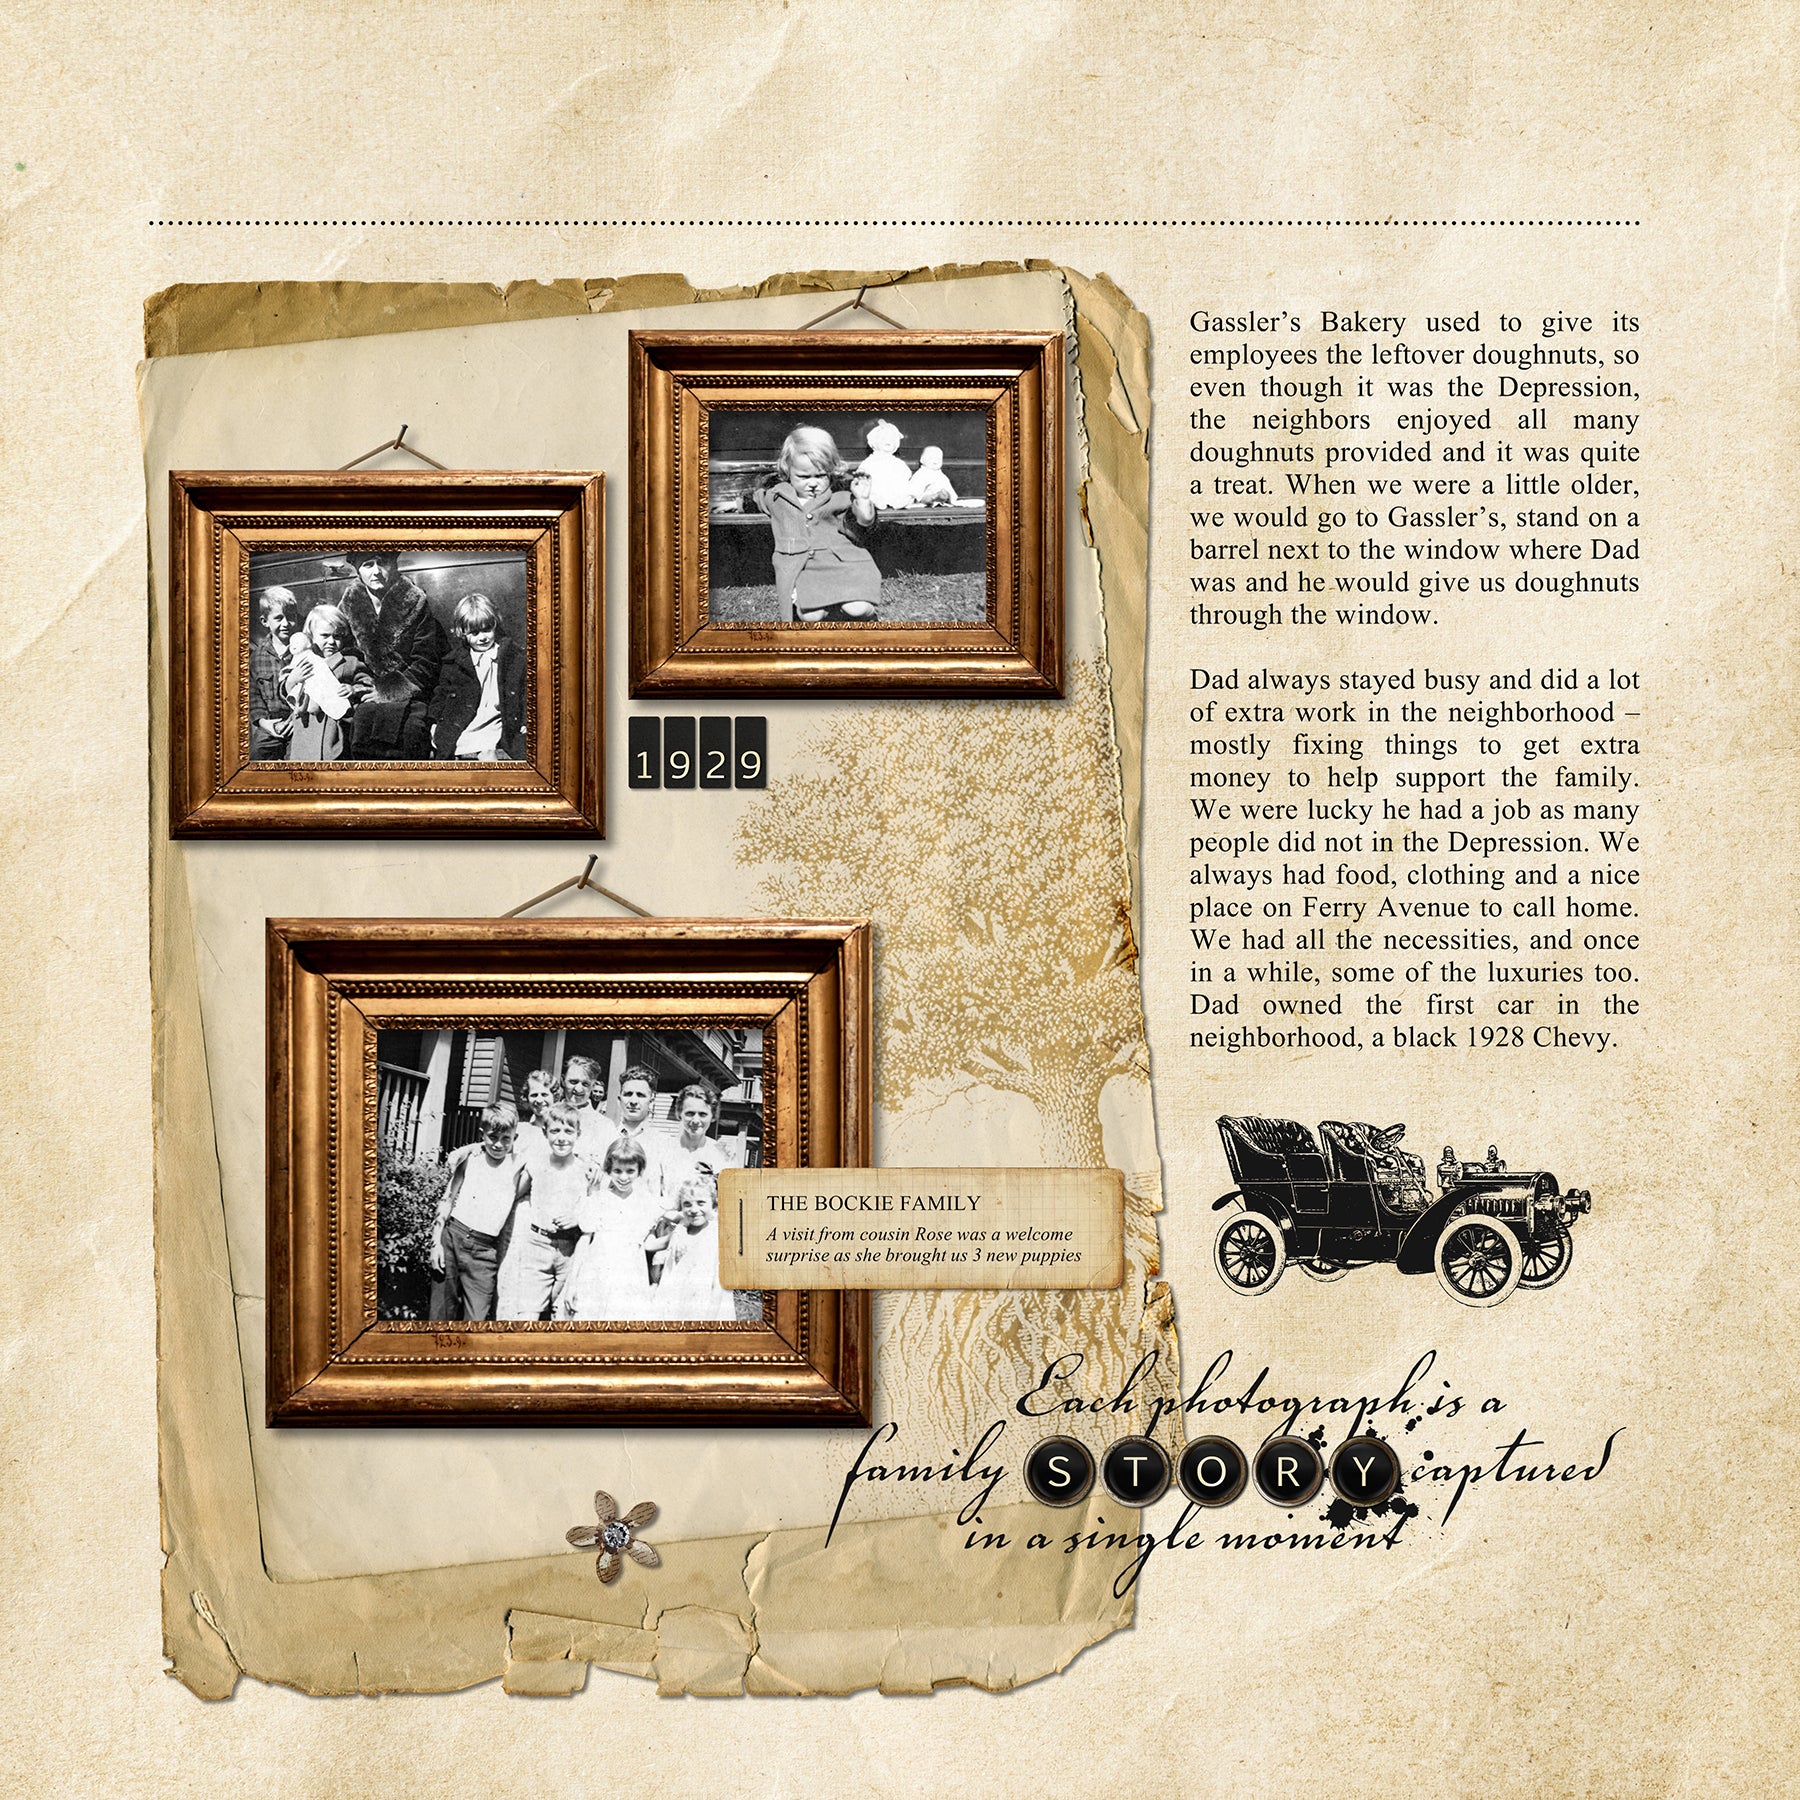 The Vintage Memories Frames 1 Digital Scrapbook Kit includes hanging digital art frames are the perfect way to accent your vintage family history and genealogy projects. Wouldn't these frames look great as a family photo gallery page?! For additional embellishments, frames, and papers, look to the Vintage Memories collection for all coordinating kits. 